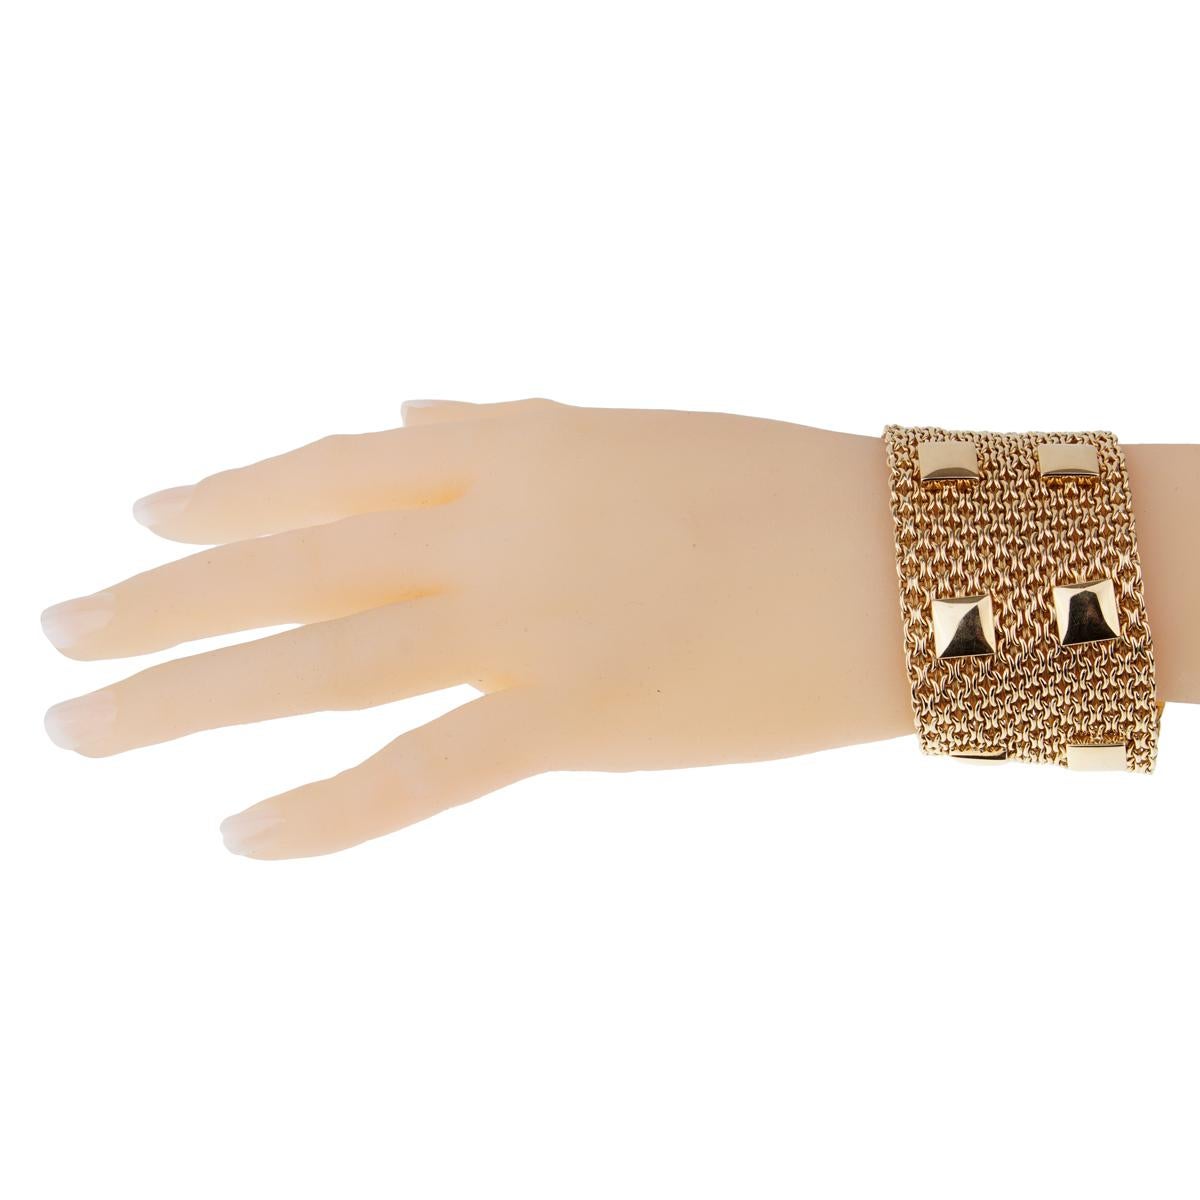 The Collier De Chein mesh gold bracelet by Hermes Paris is the epitome of style. Featuring an elegant woven pattern (1.65